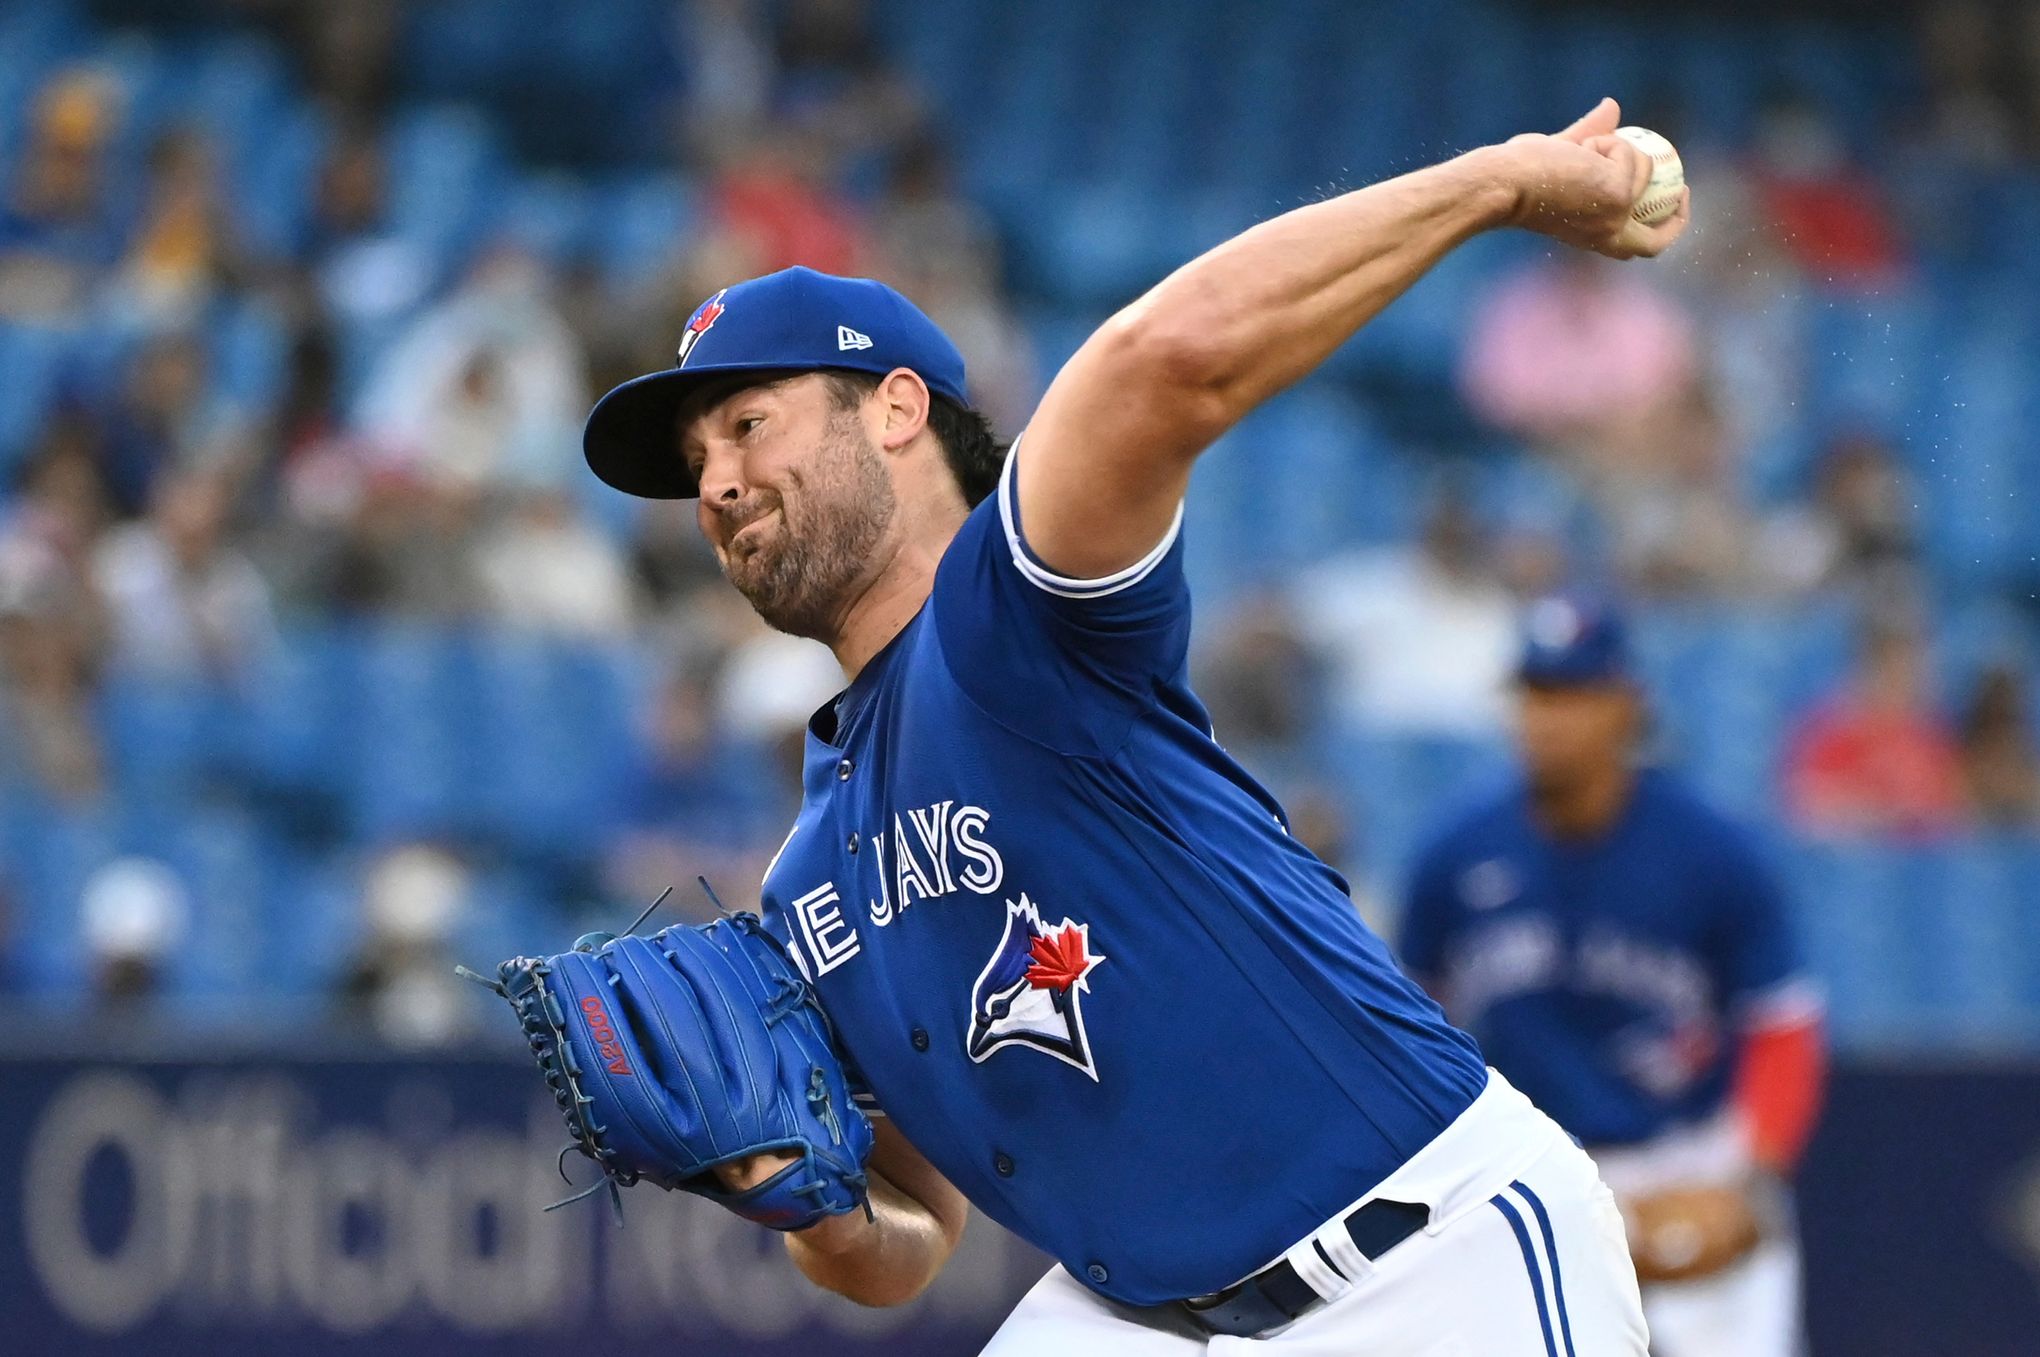 Ray fans 14, Kirk gets winning hit, Jays beat White Sox 3-1